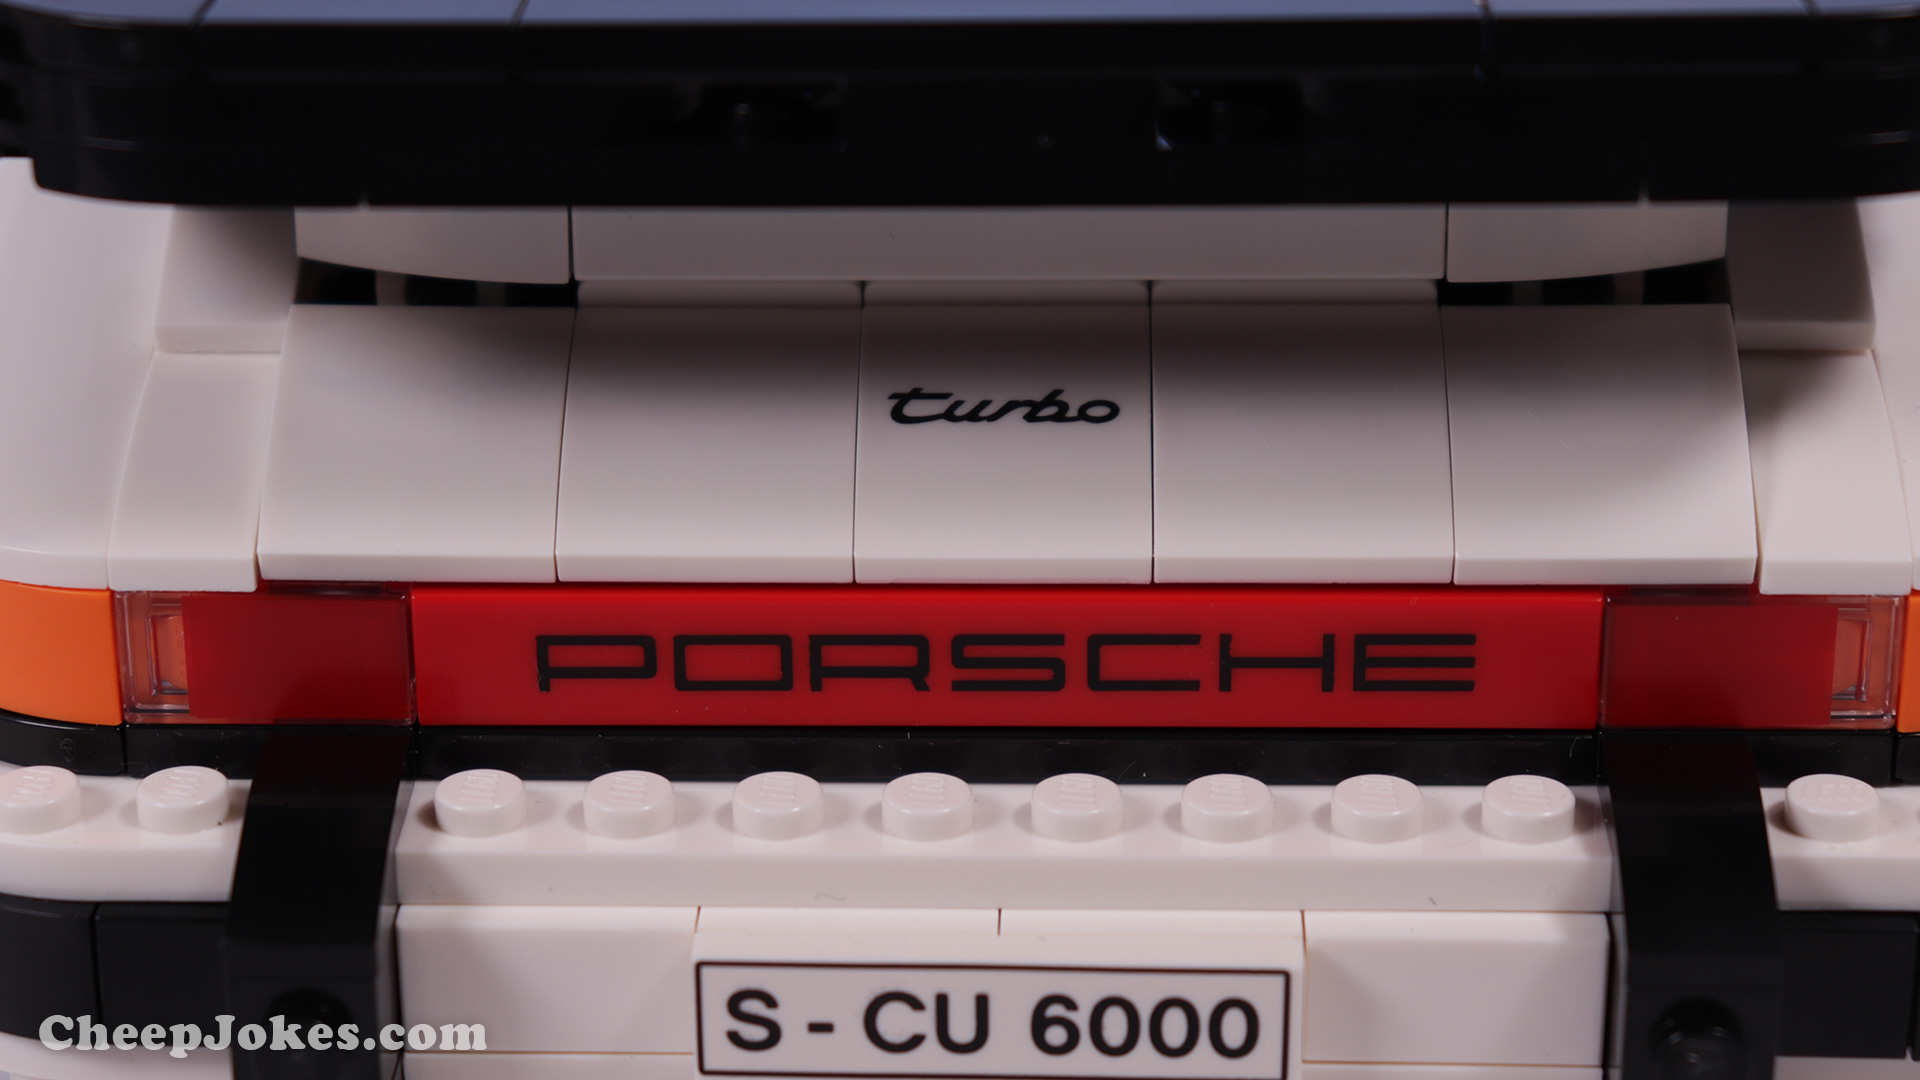 LEGO 10295 – Porsche 911 Targa and 911 Turbo  The LEGO® Group has taken the covers off a new LEGO version of one of the most coveted nameplates in automotive history, with the unveiling of the two-in-one LEGO Porsche 911 Turbo and 911 Targa set that brings together two icons from the 1970s and 80s.